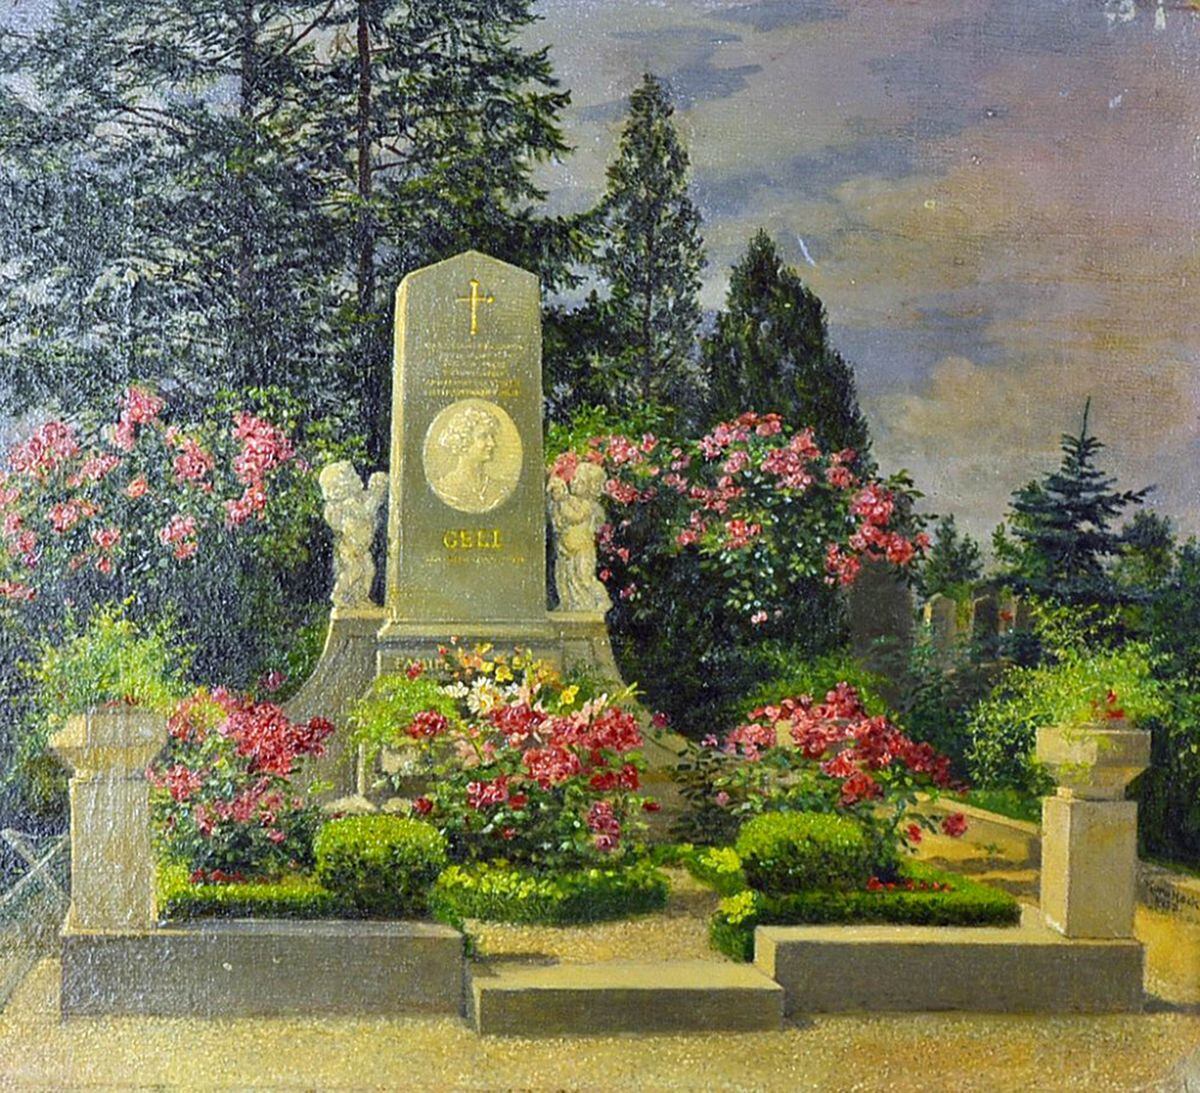 An unsigned painting of the grave of Geli Raubels, Adolf Hitlers niece and possible lover, which is likely to have been painted by Hitler himself